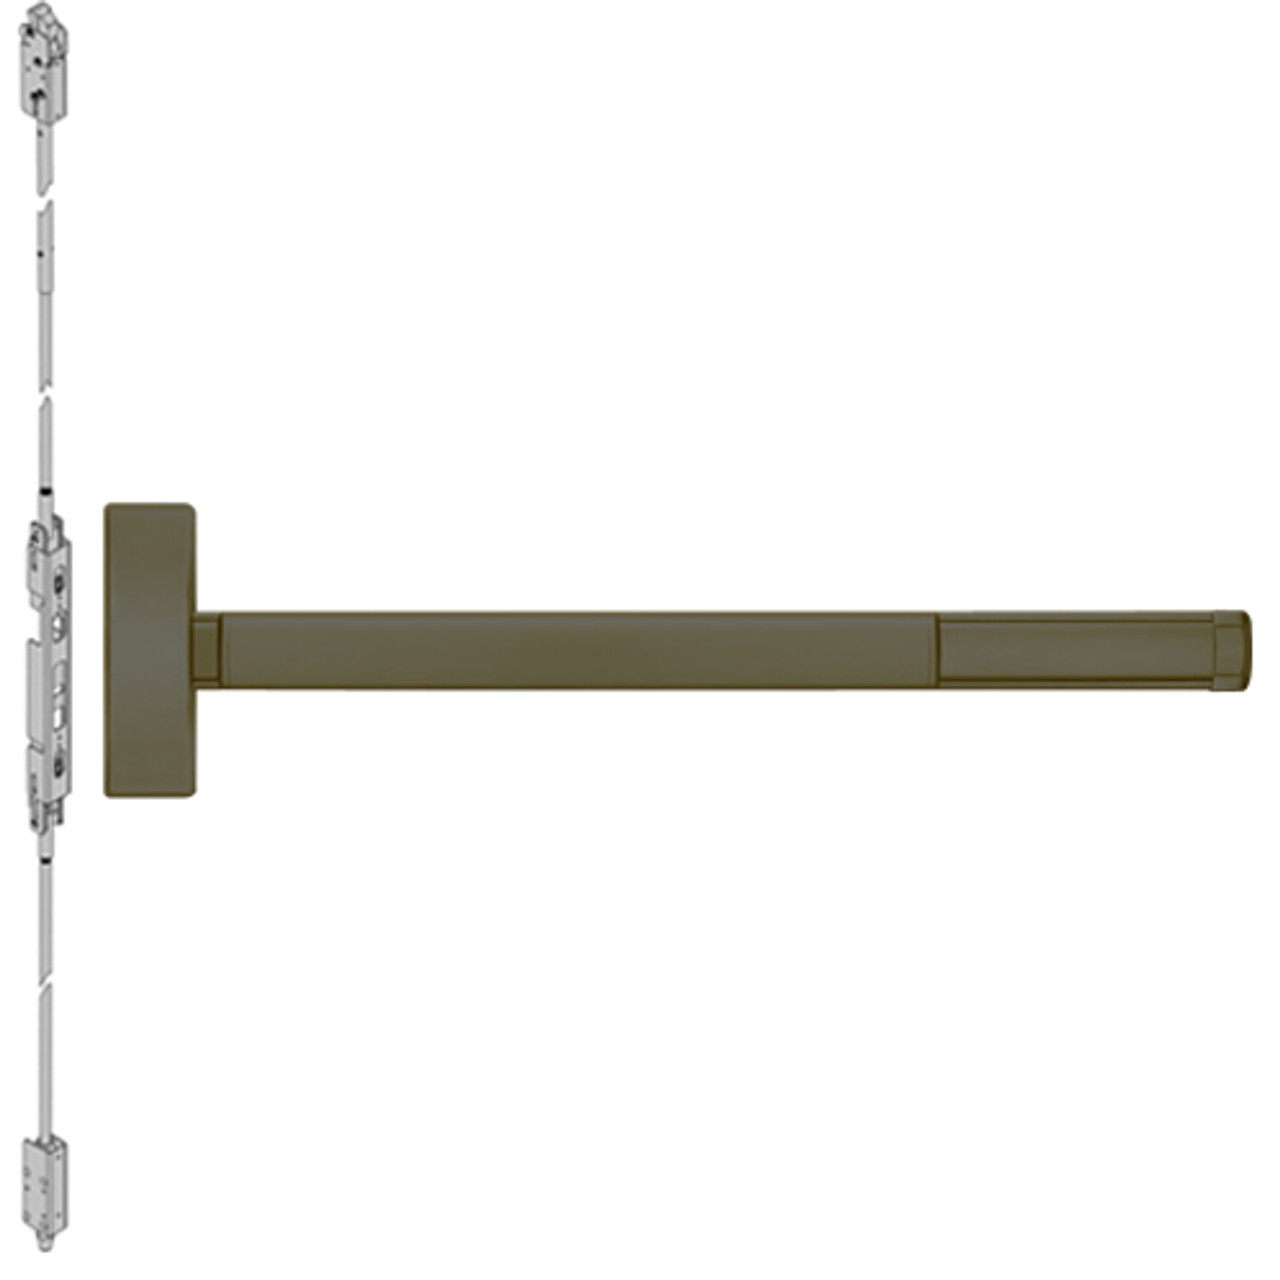 DE2814LBR-613-36 PHI 2800 Series Concealed Vertical Rod Exit Device with Delayed Egress Prepped for Lever-Knob Always Active in Oil Rubbed Bronze Finish